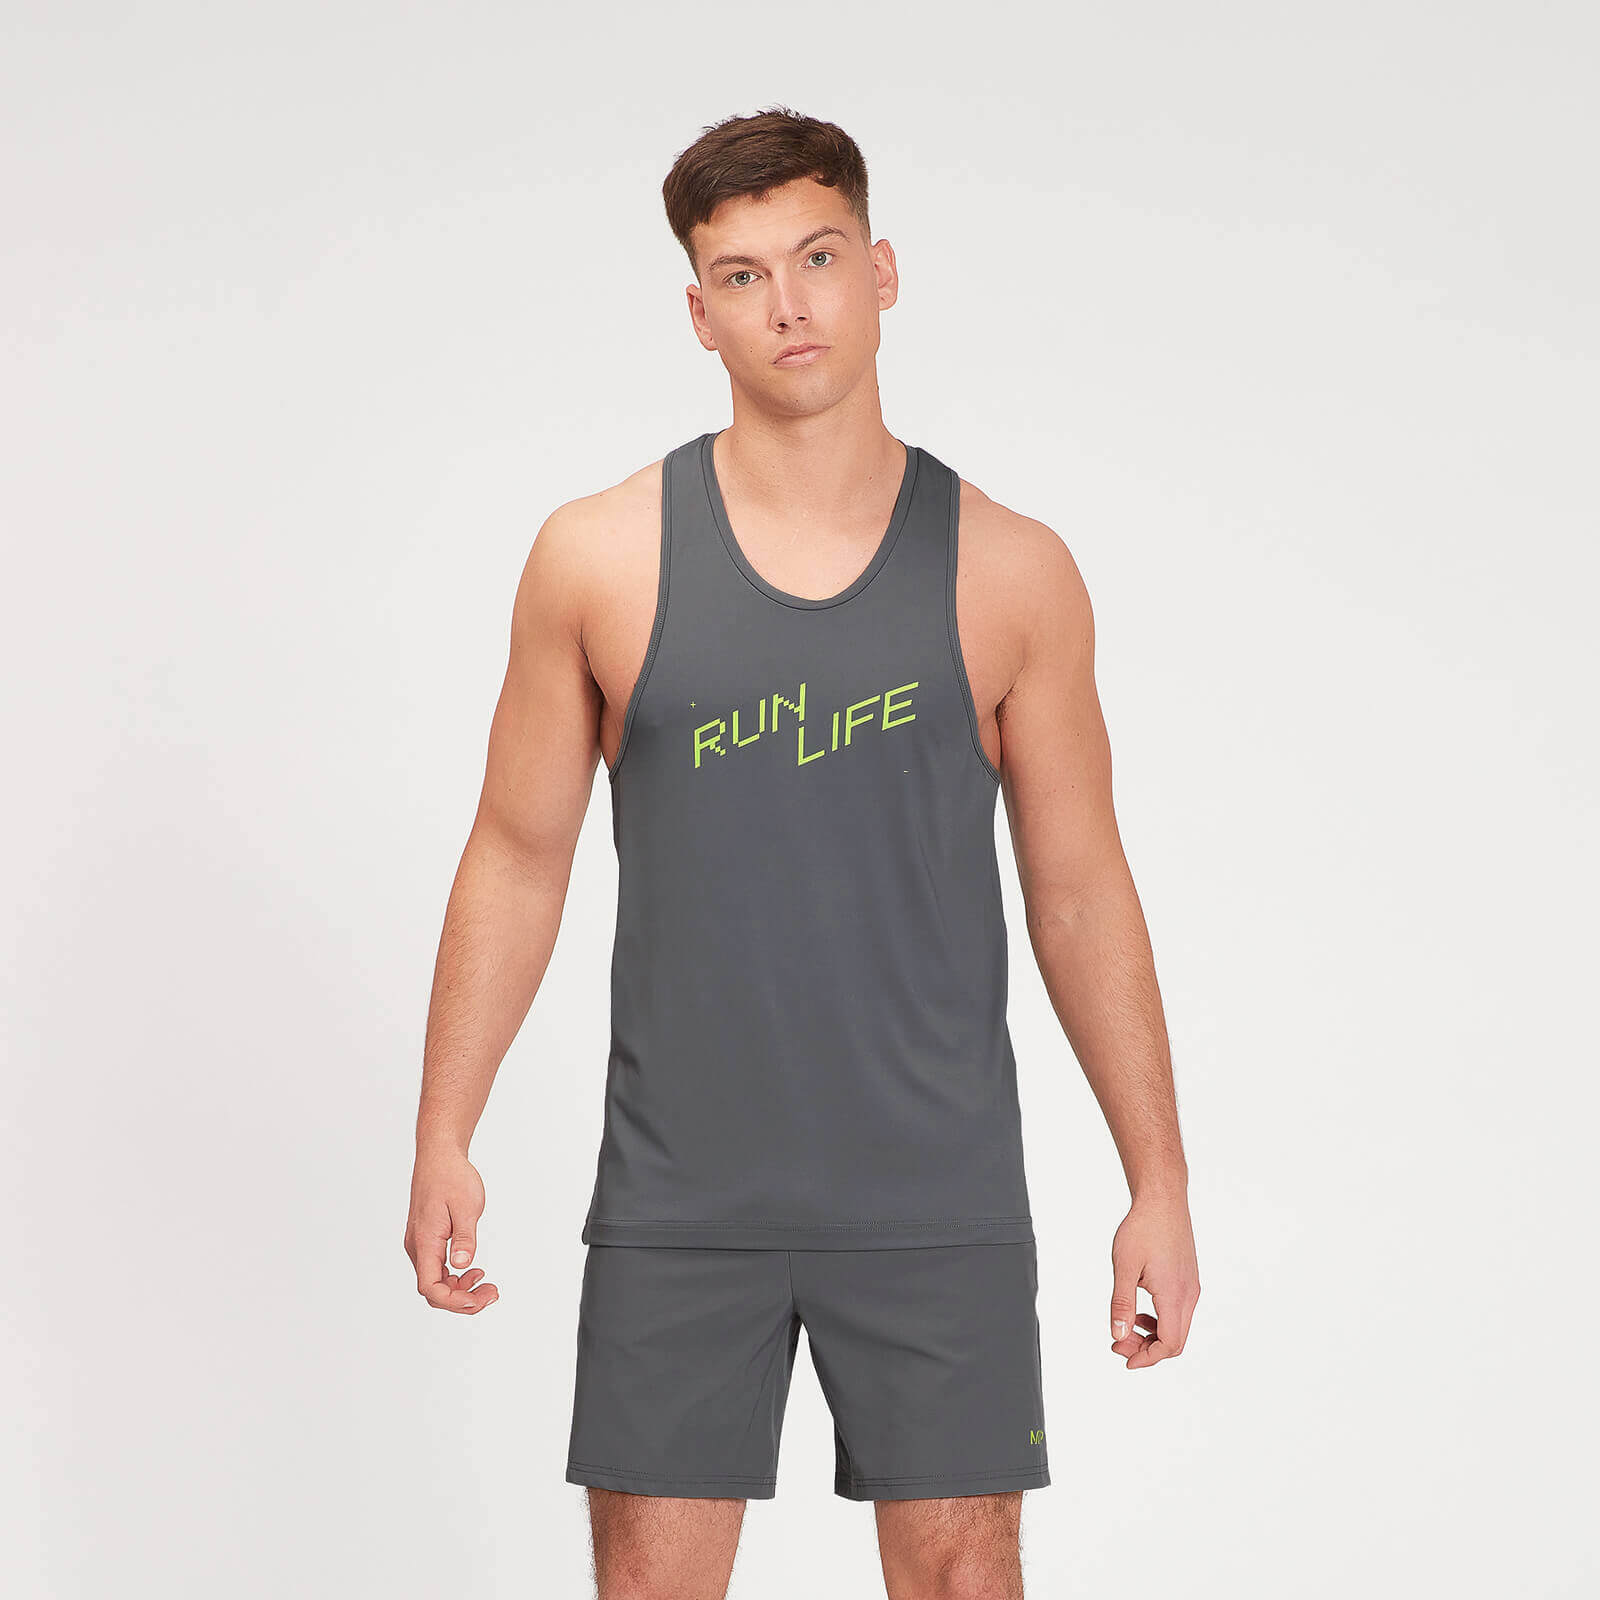 MP Men's Graphic Running Tank Top - Carbon - L